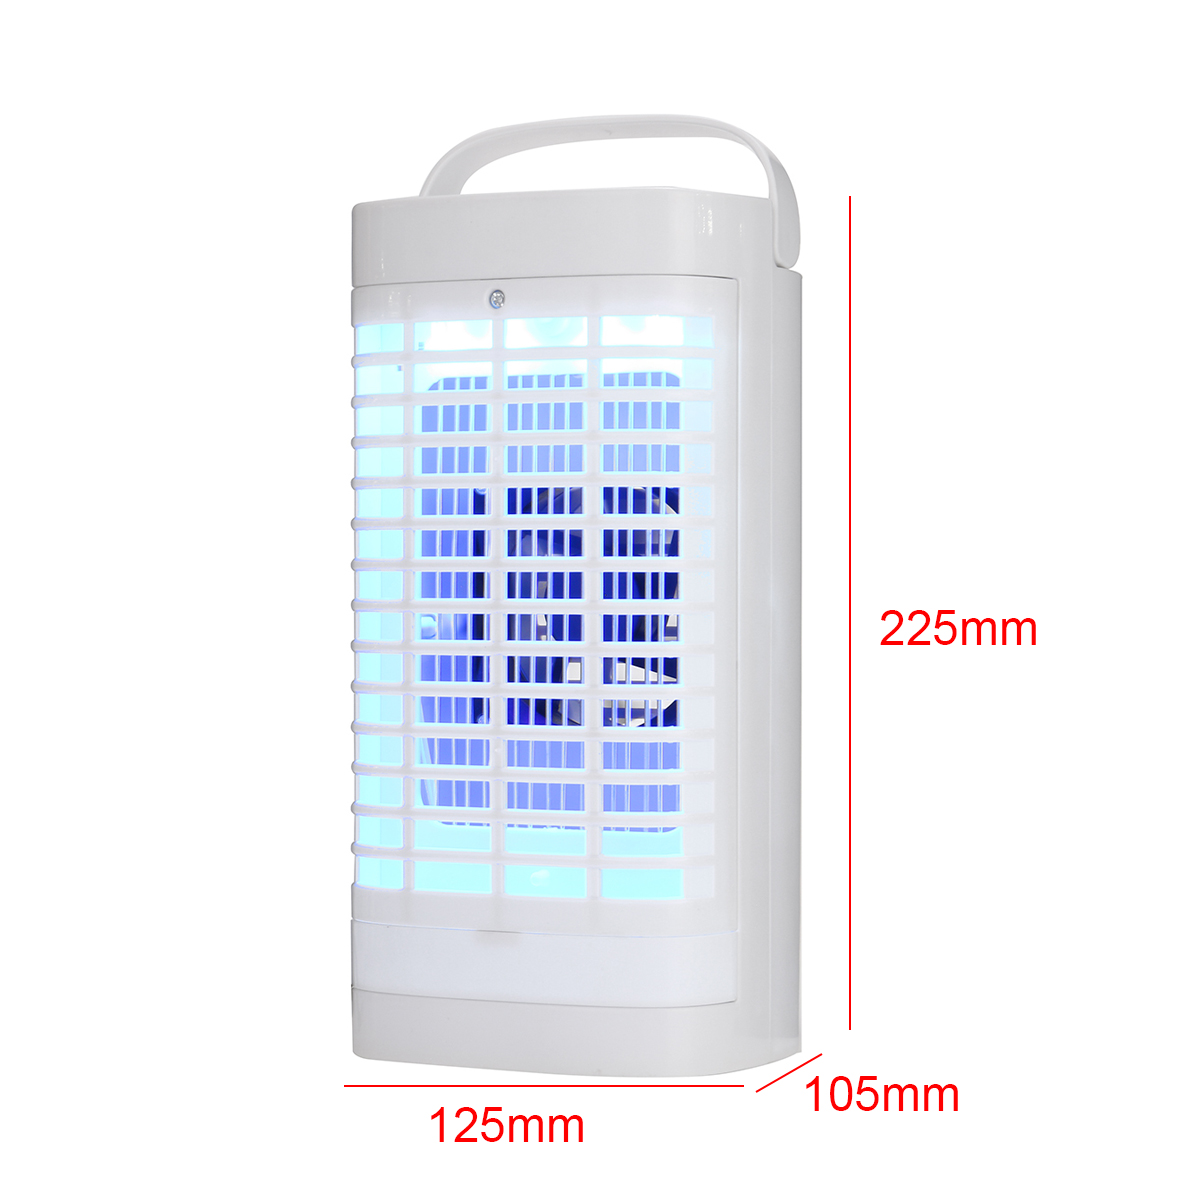 Electric-Shock--Suction-Mosquito-Repellent-Light-Mute-LED-Lamp-Insect-Killer-1678238-12